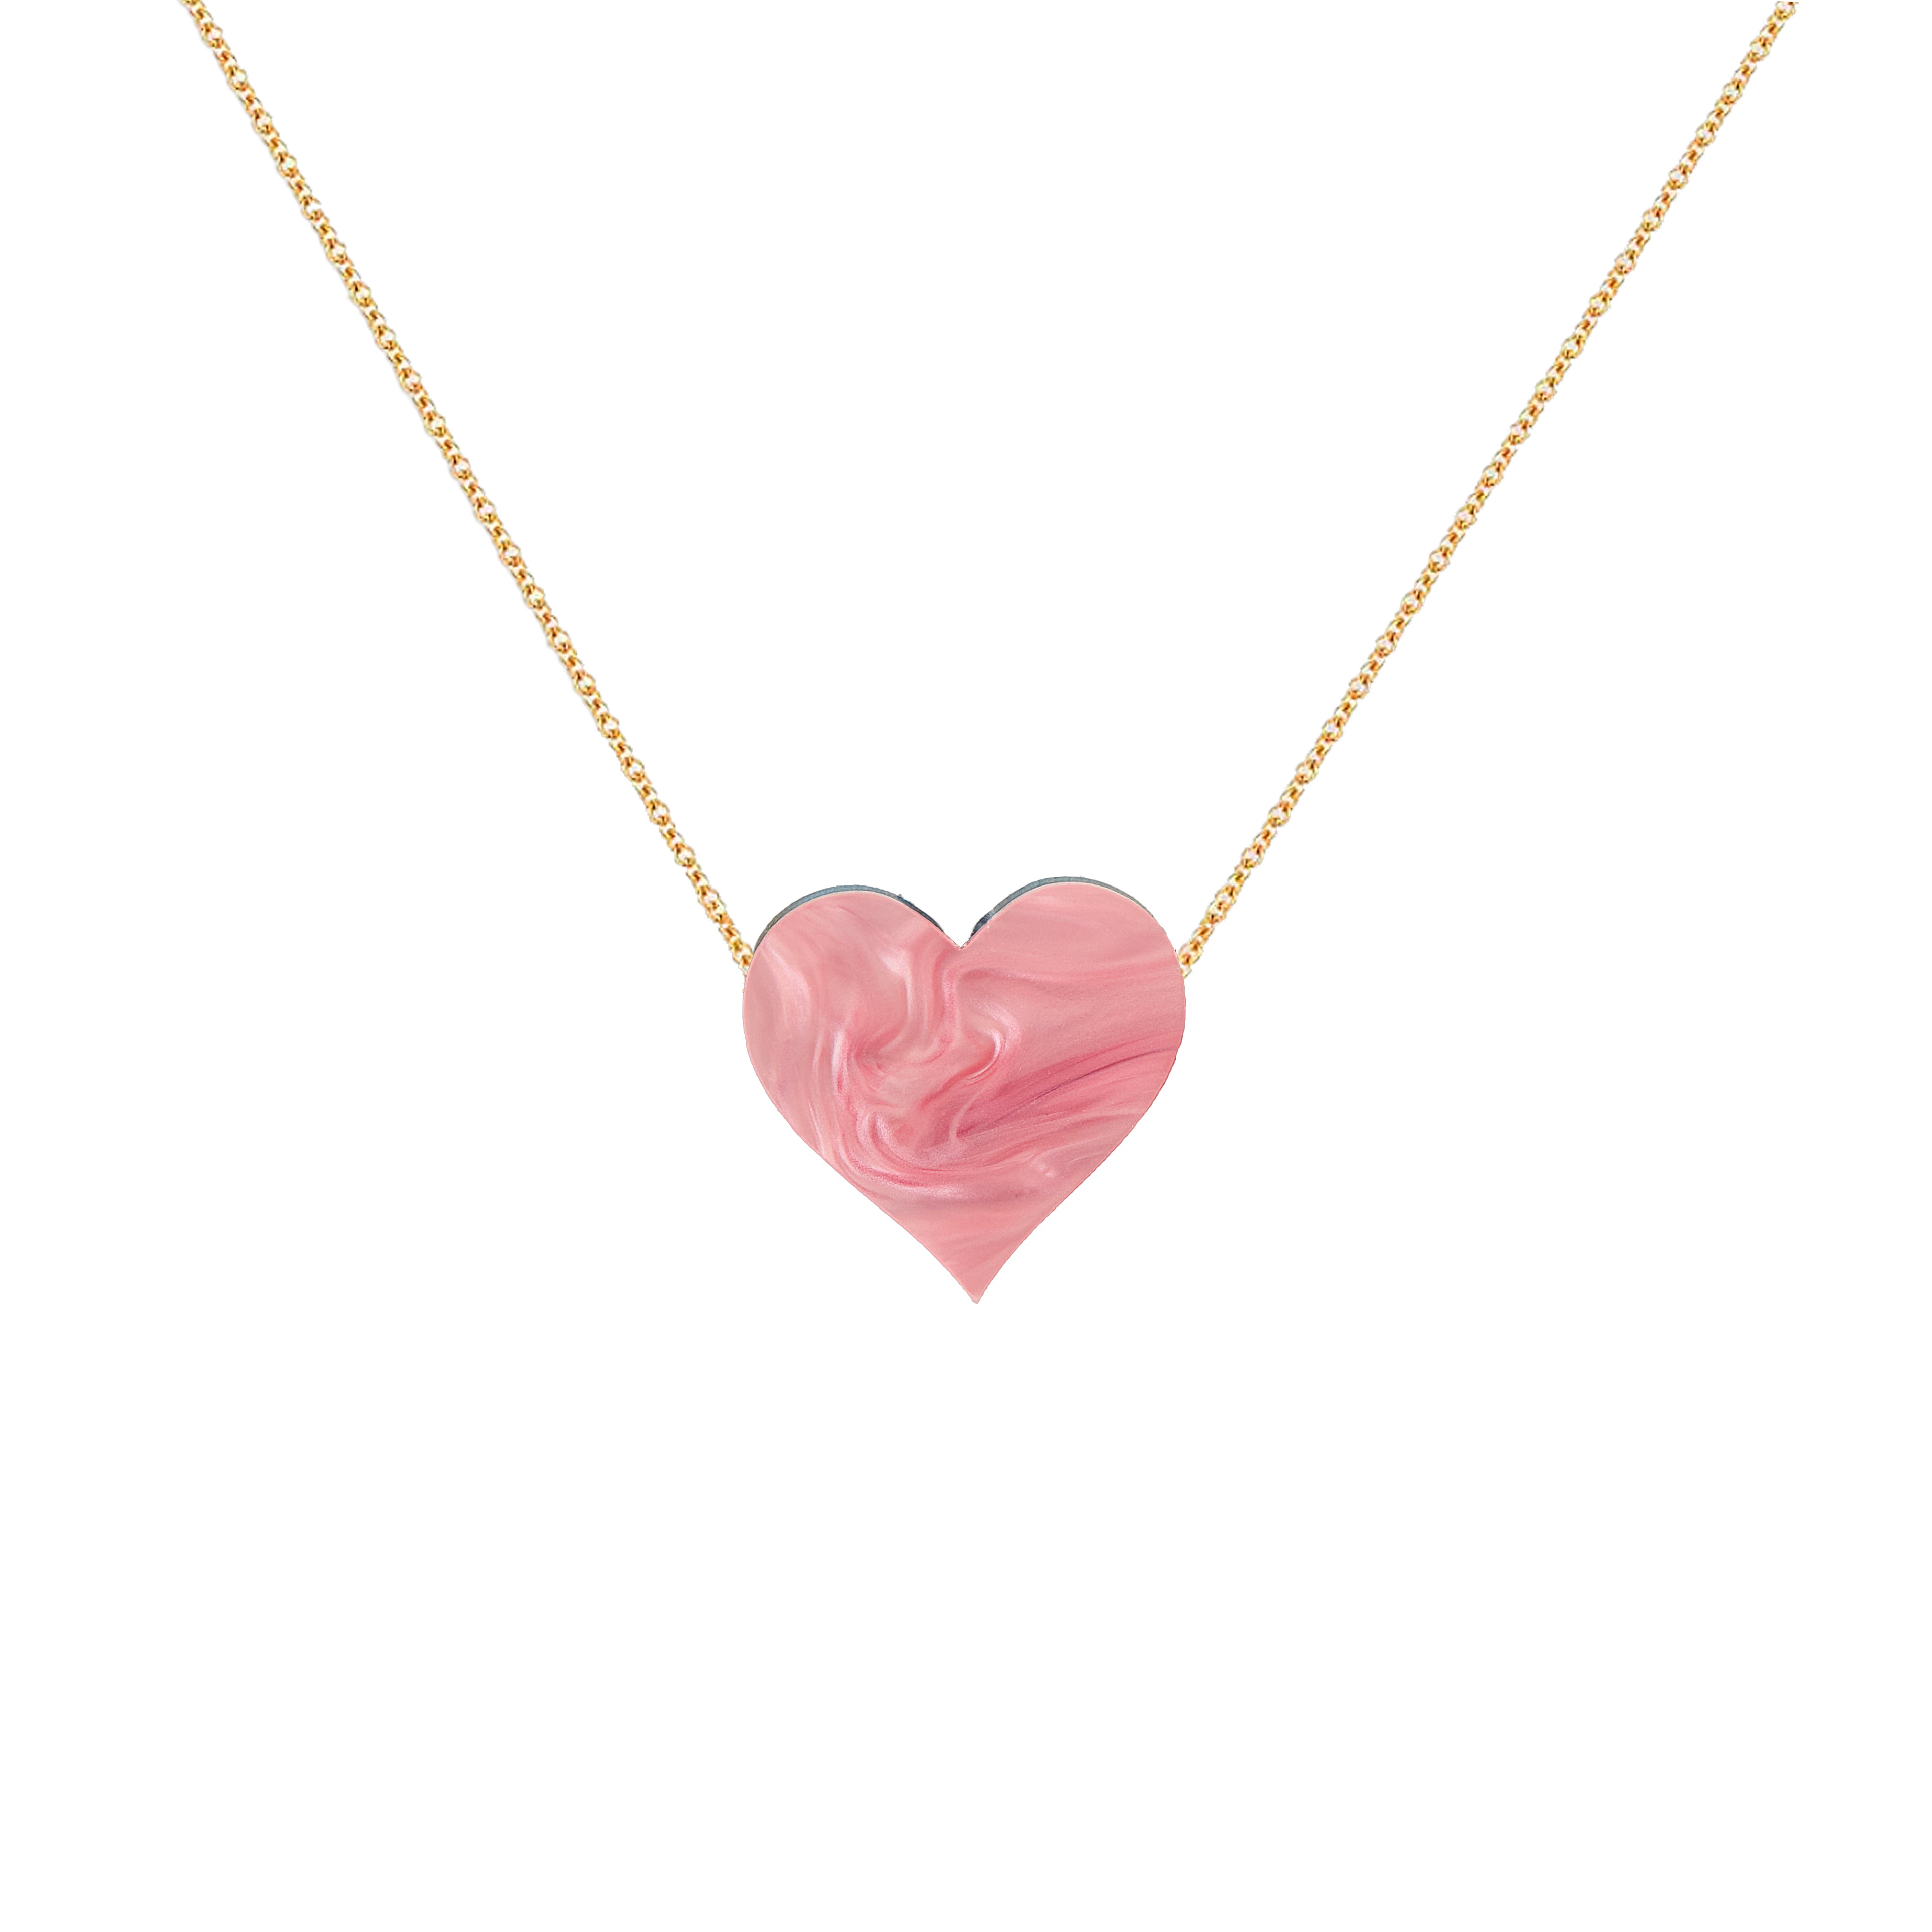 Reversible Heart Necklace PINK/BLUE